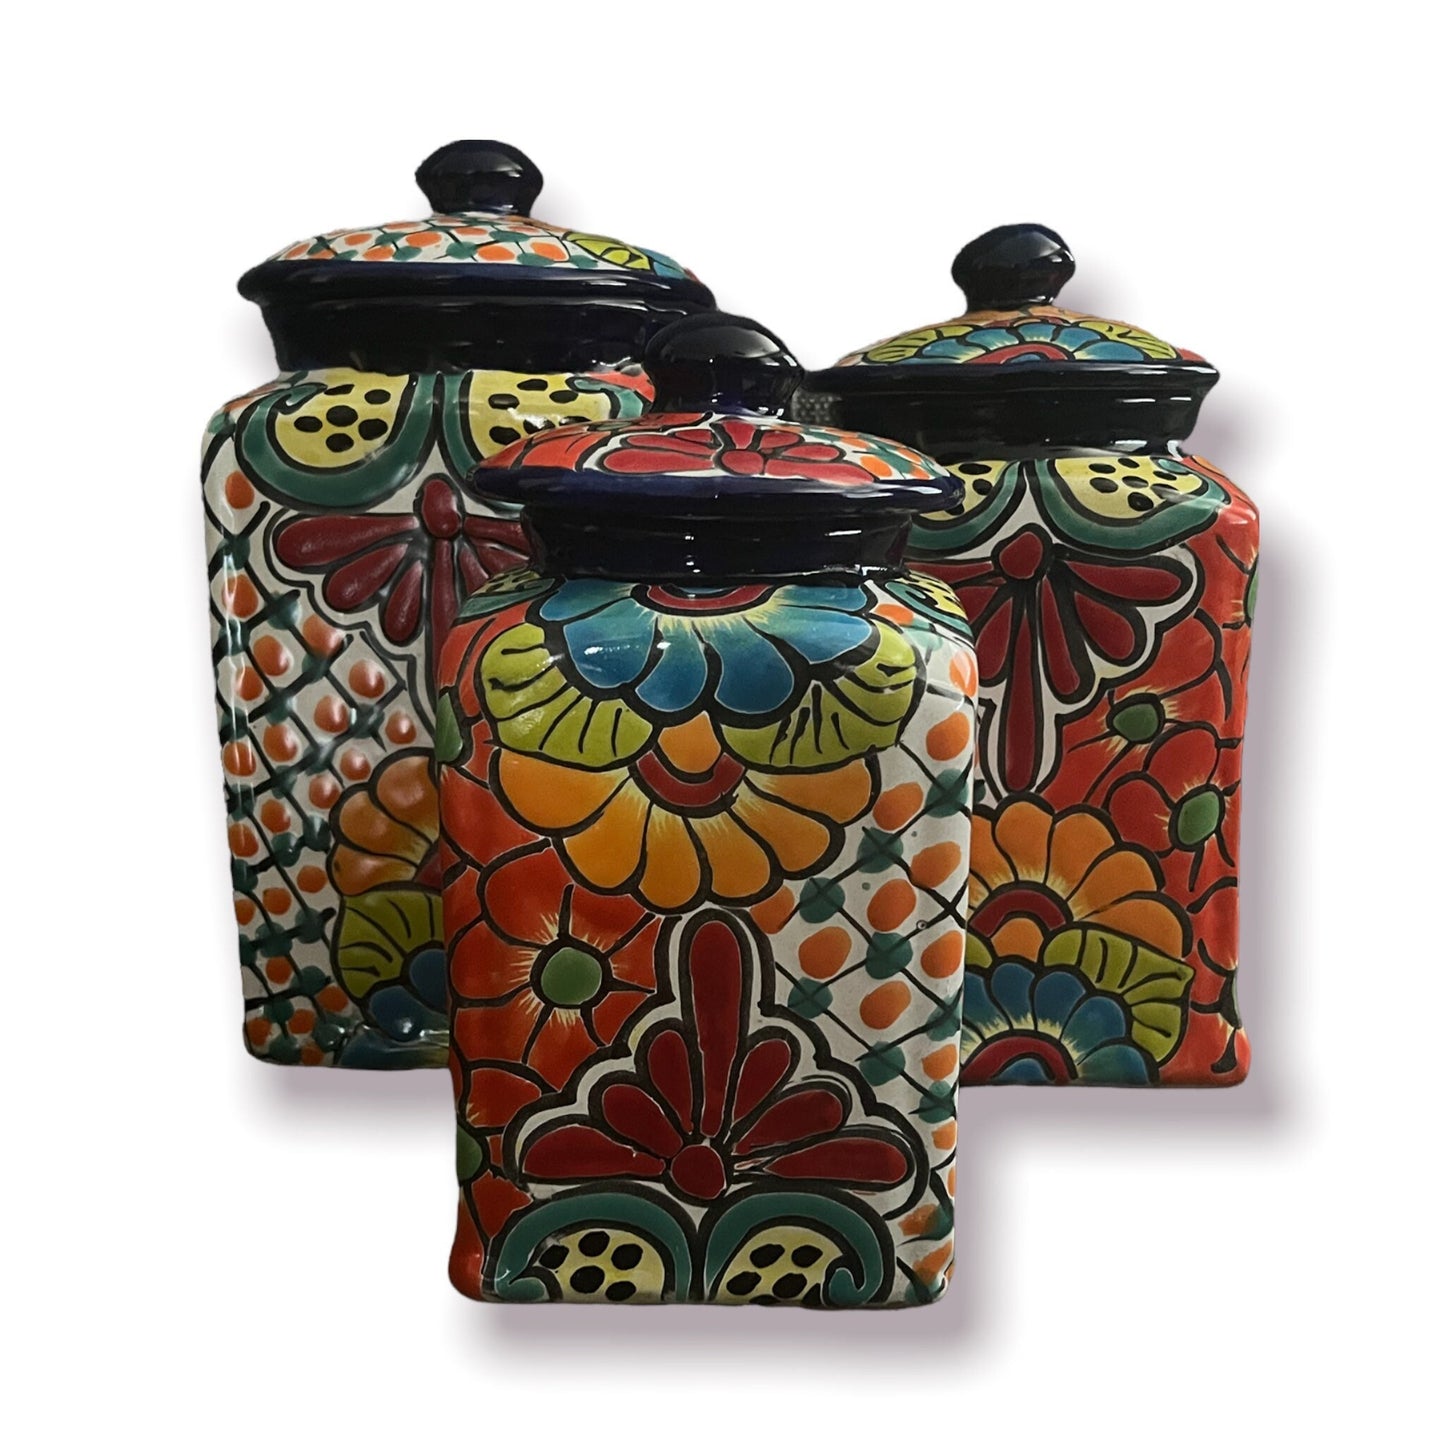 Colorful Mexican Talavera Canister Set | Artisan Hand-Painted Pottery